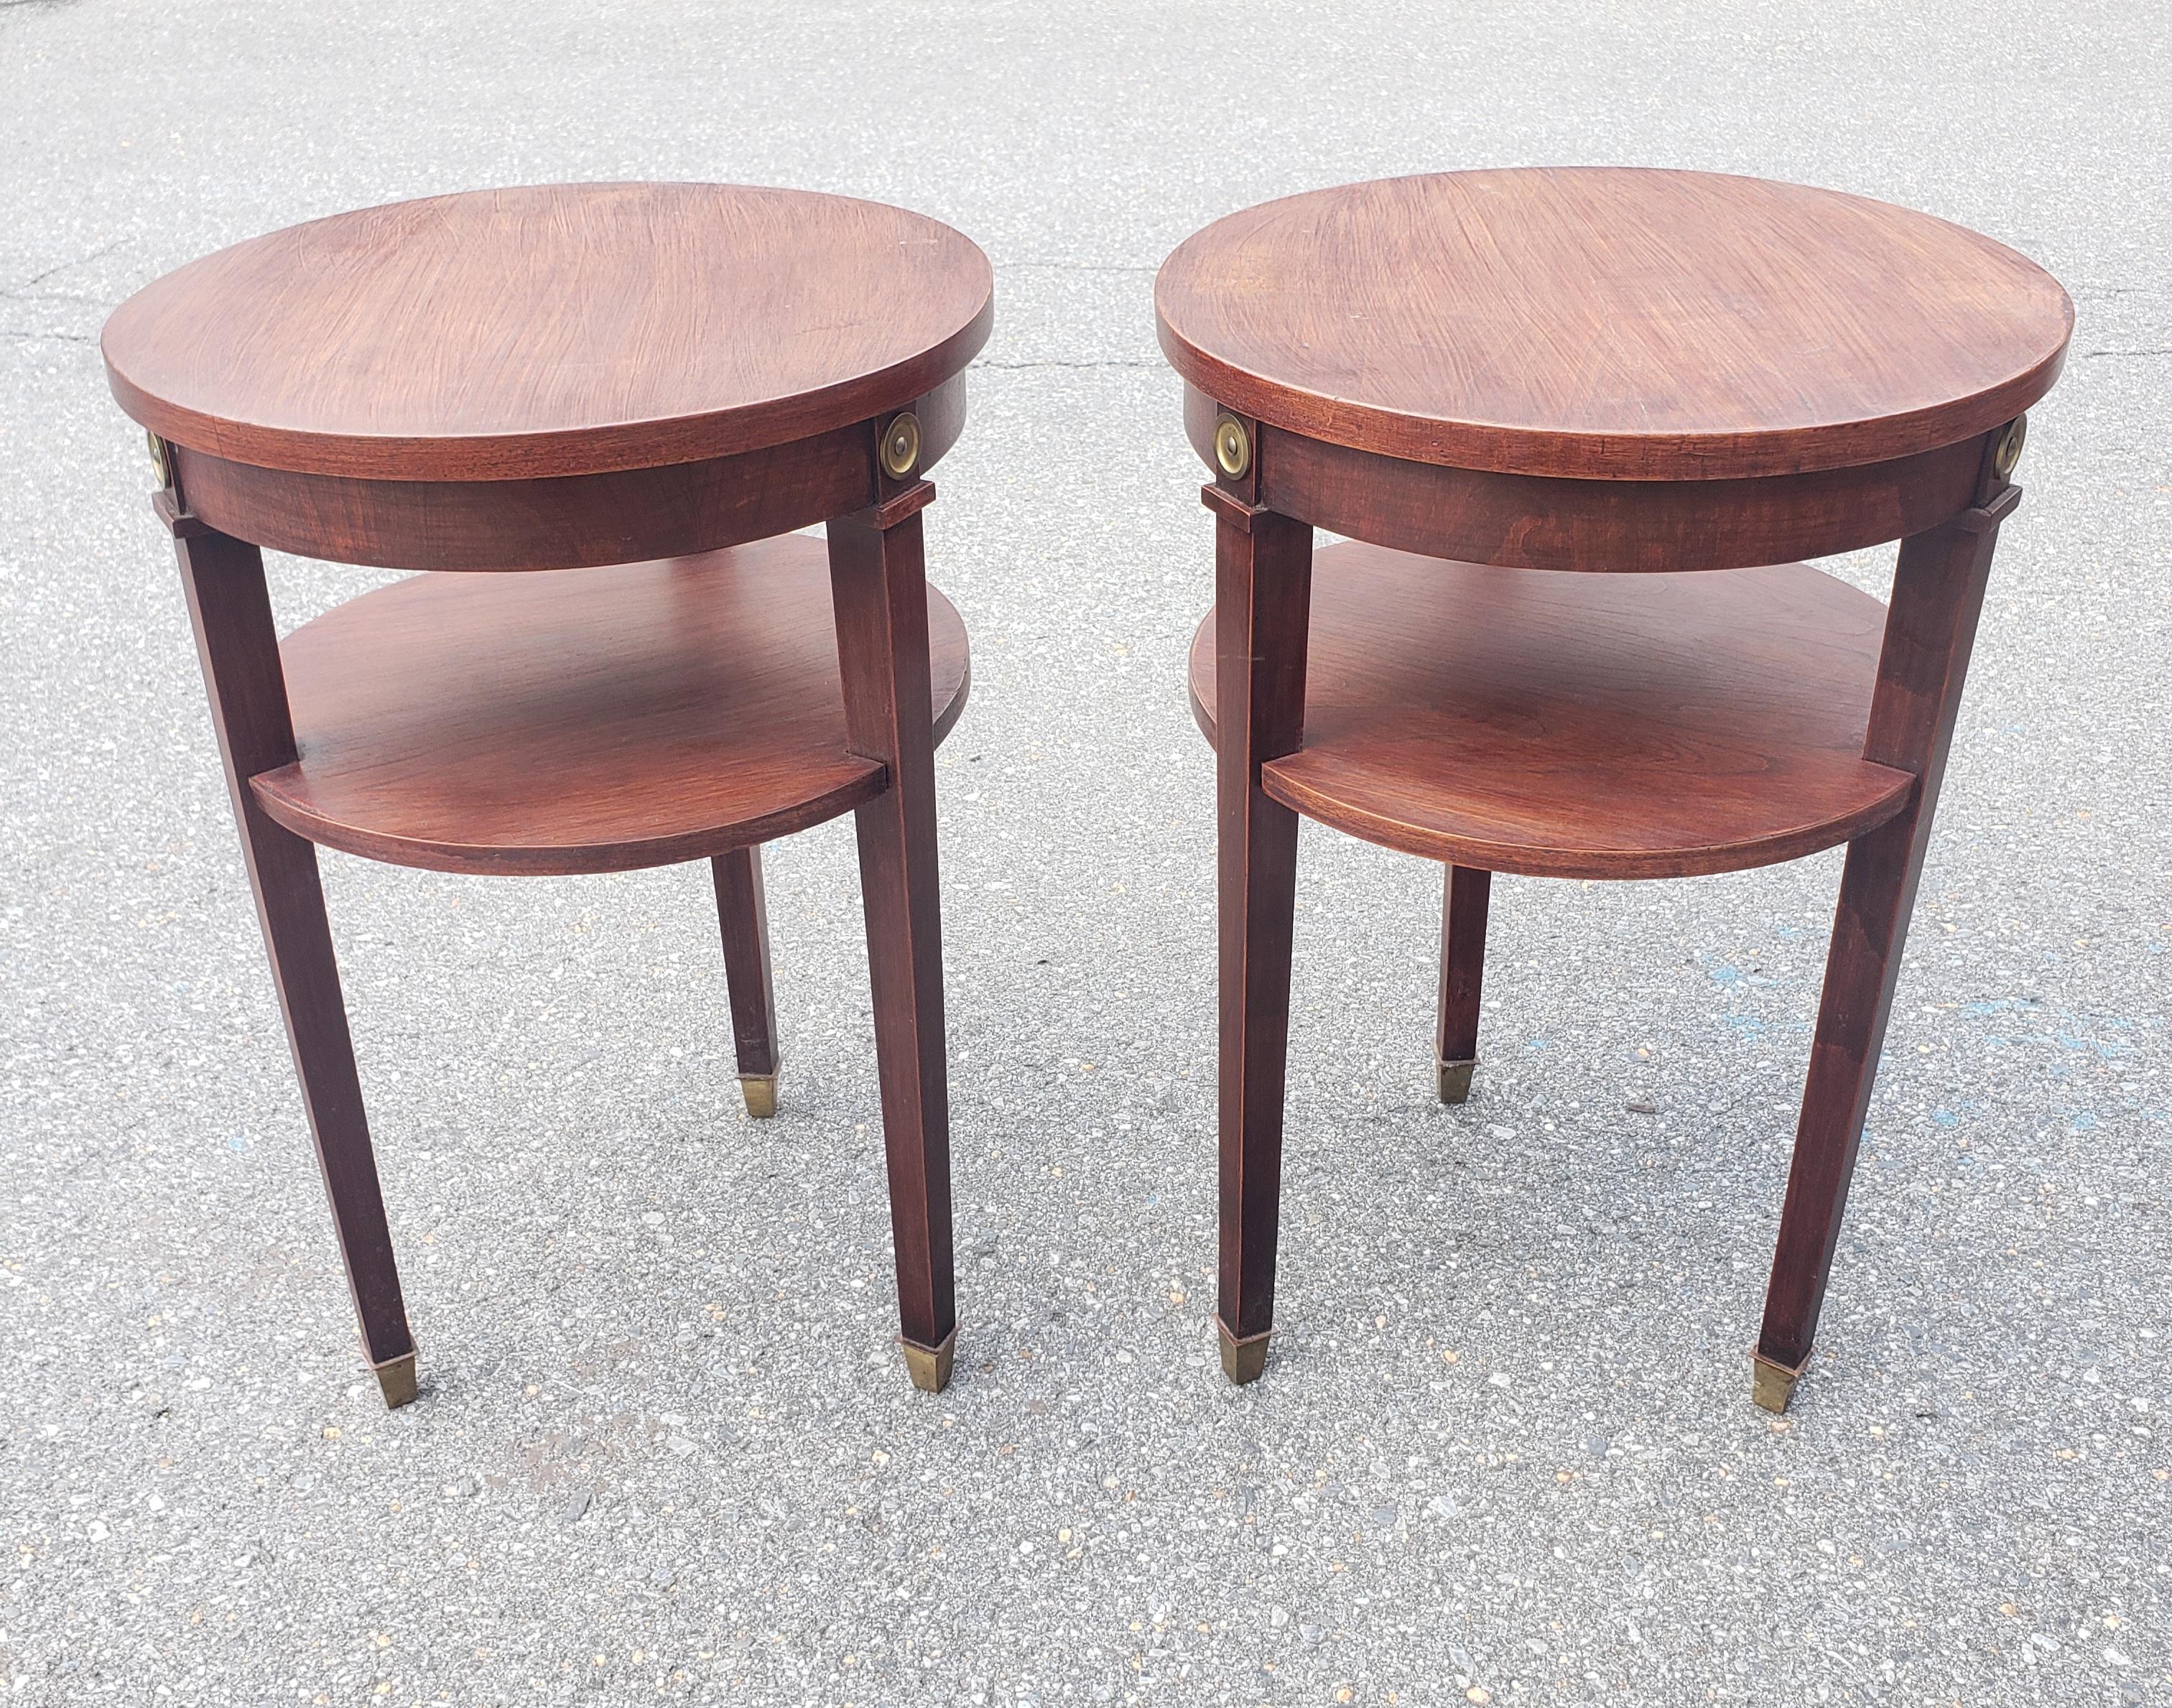 Mid-Century Modern 1950s Refinished Mahogany 2-Tier Round Candle Stand with Brass Capped Legs, Pair For Sale